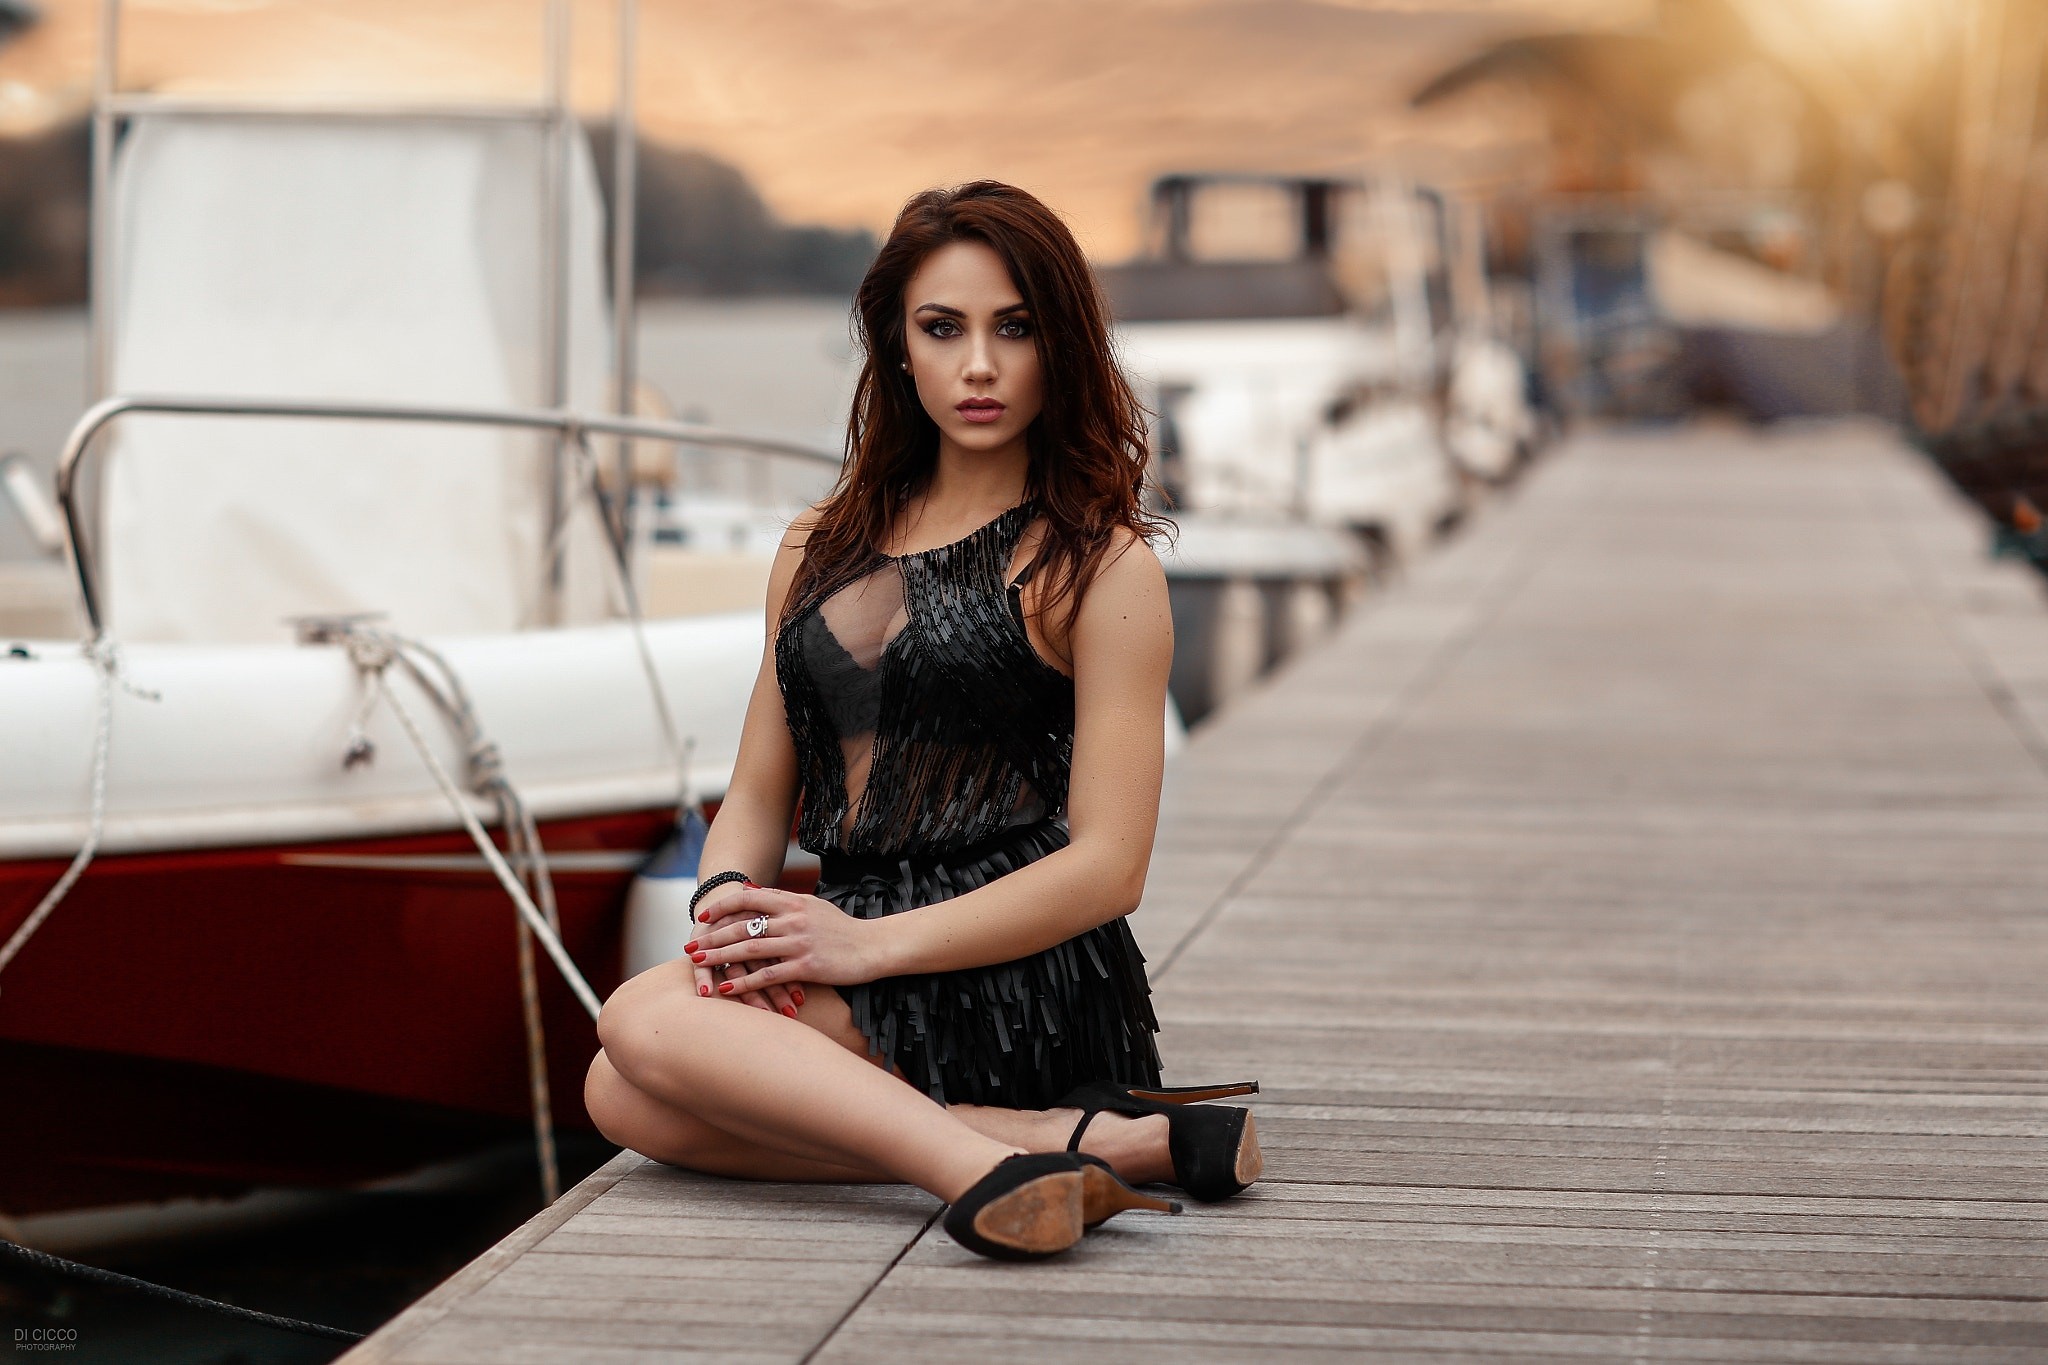 People 2048x1365 women brunette dress see-through clothing black bras high heels red nails dark eyes smoky eyes cleavage depth of field dock Alessandro Di Cicco women outdoors sitting looking at viewer